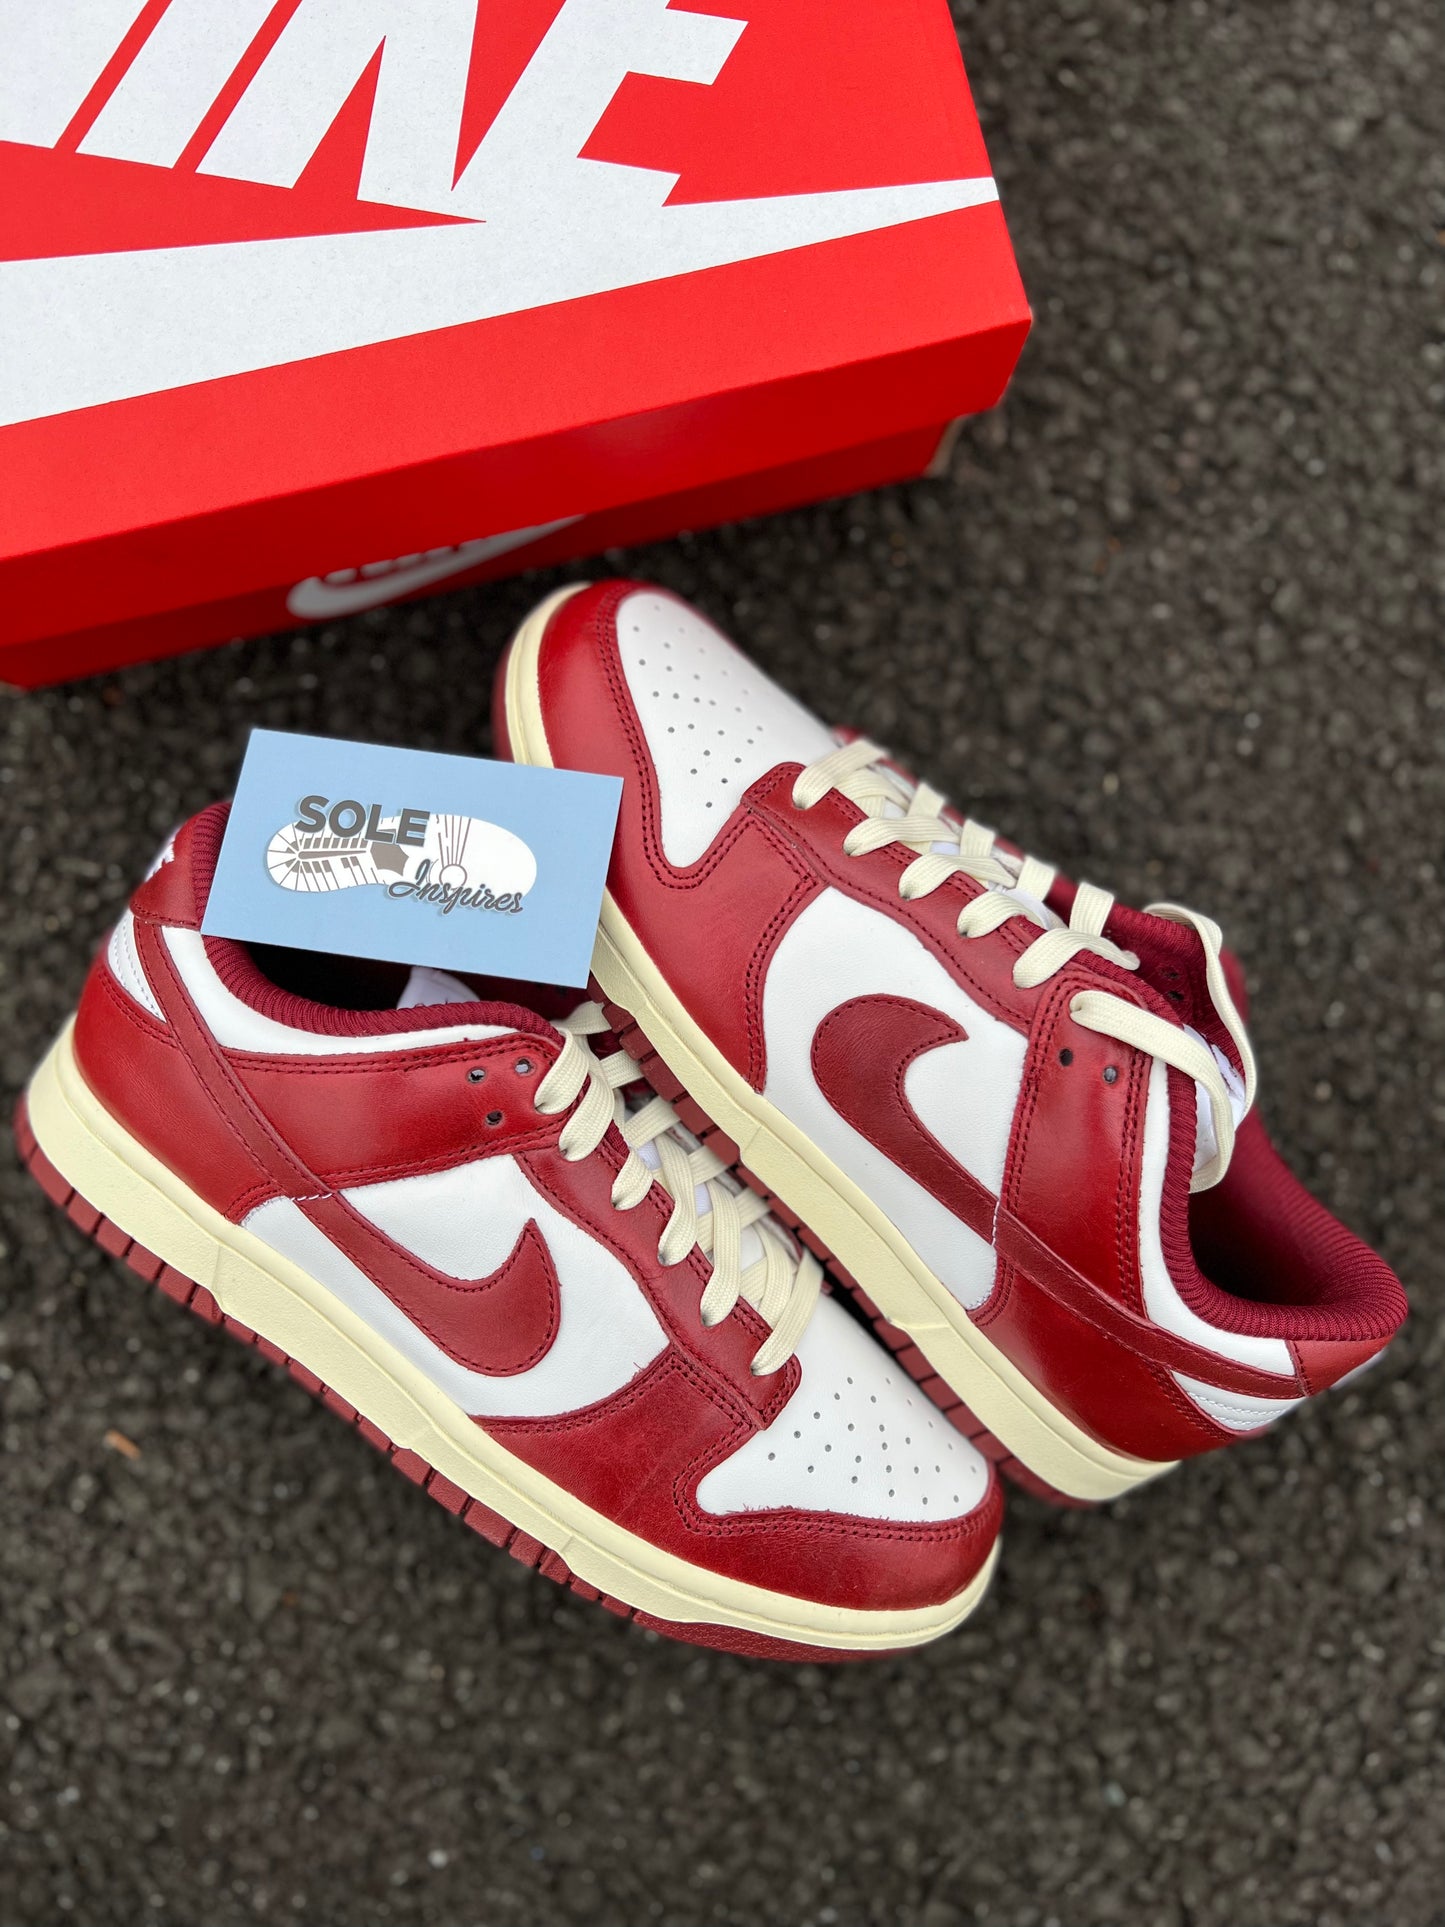 Nike Dunk Low “Vintage Red” (GS)